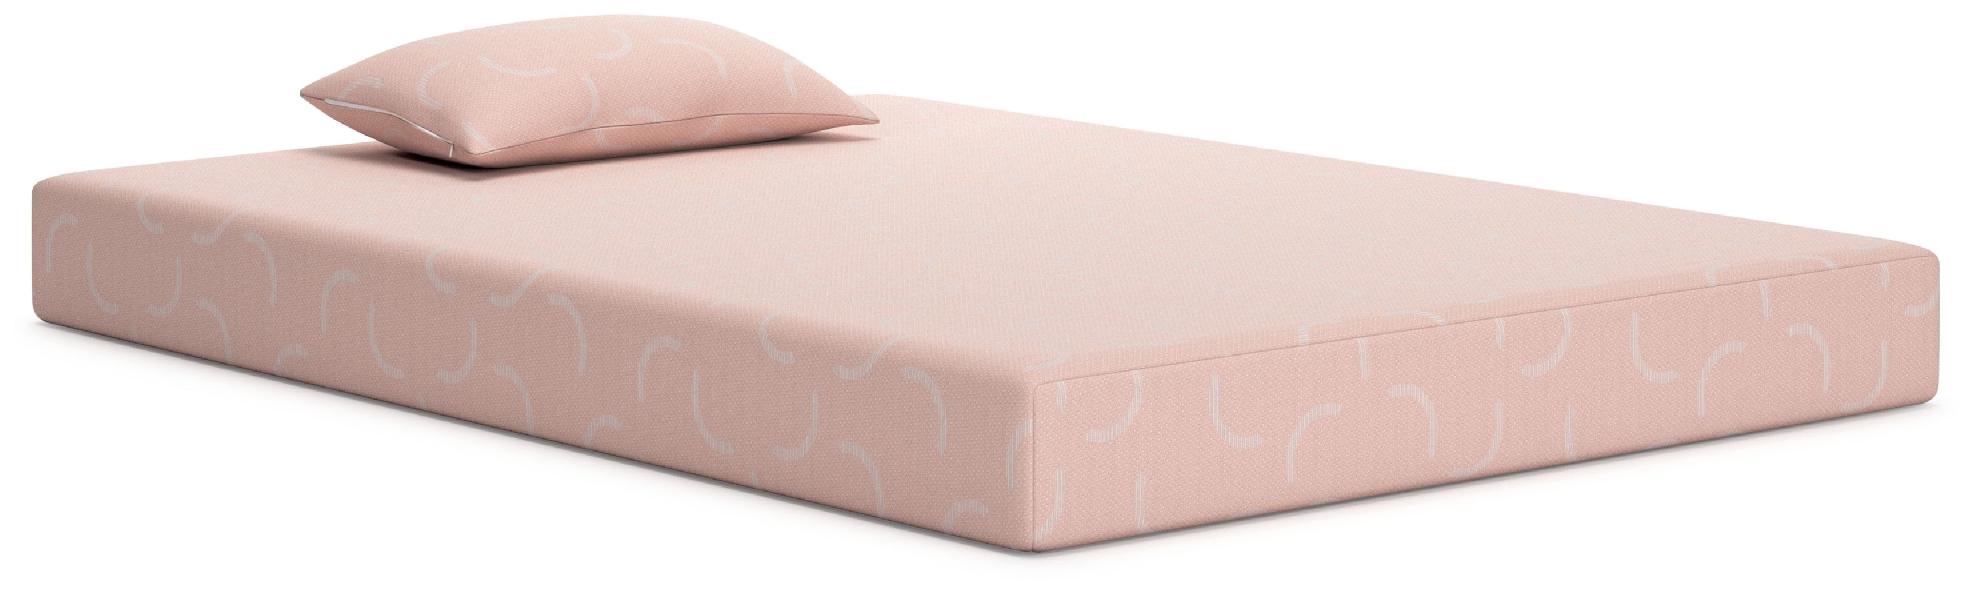 Image of Ikidz Coral - Coral - Twin Mattress And Pillow Set of 2